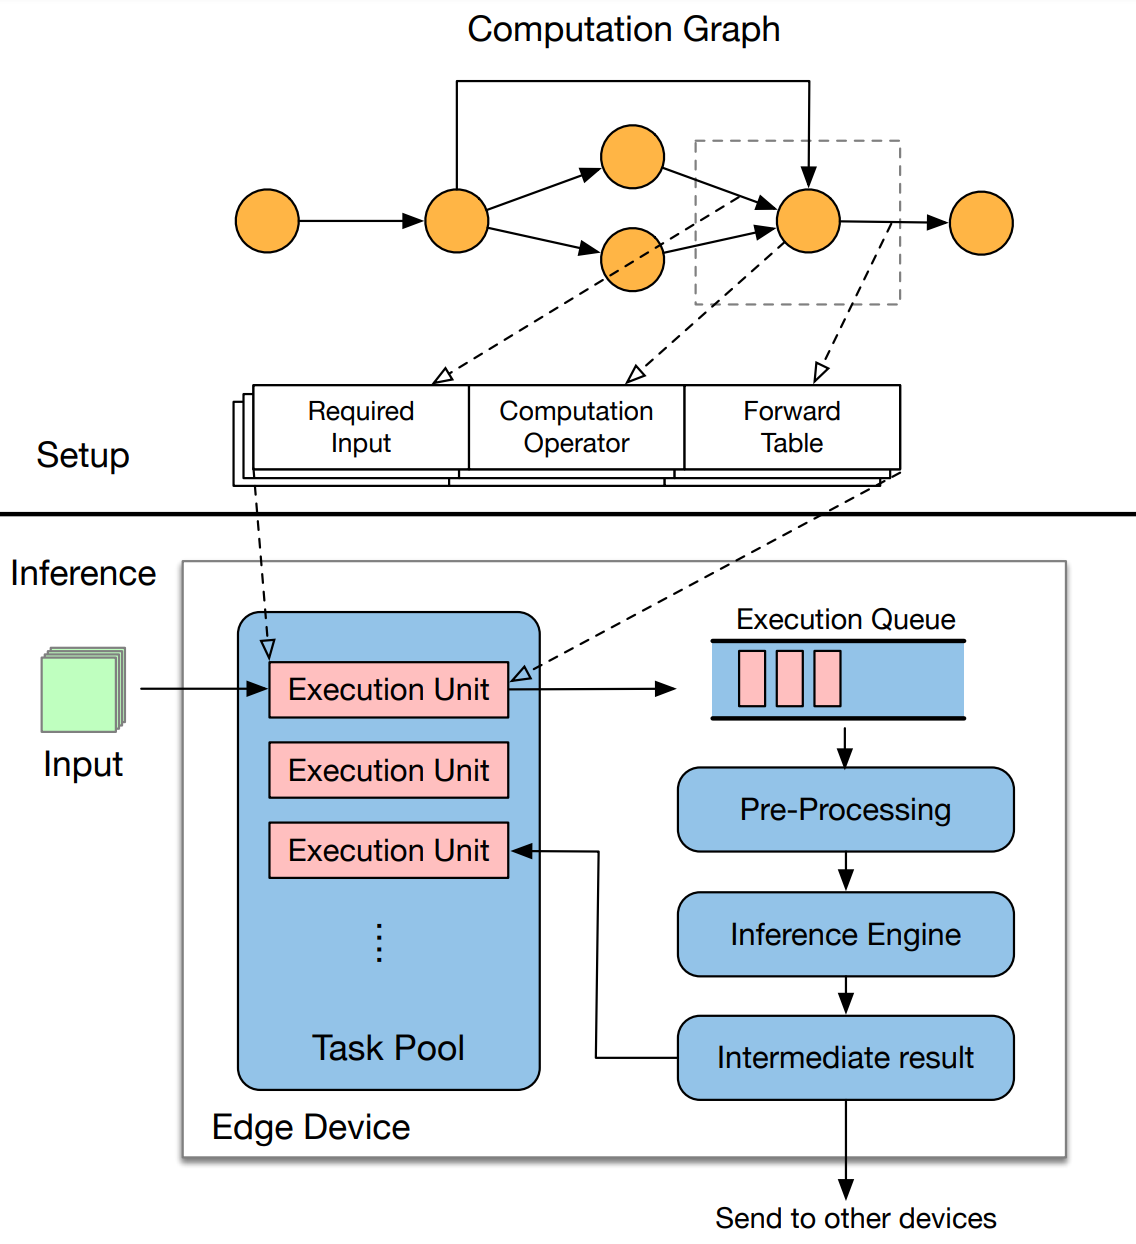 Distributed inference with a DAG structured model.